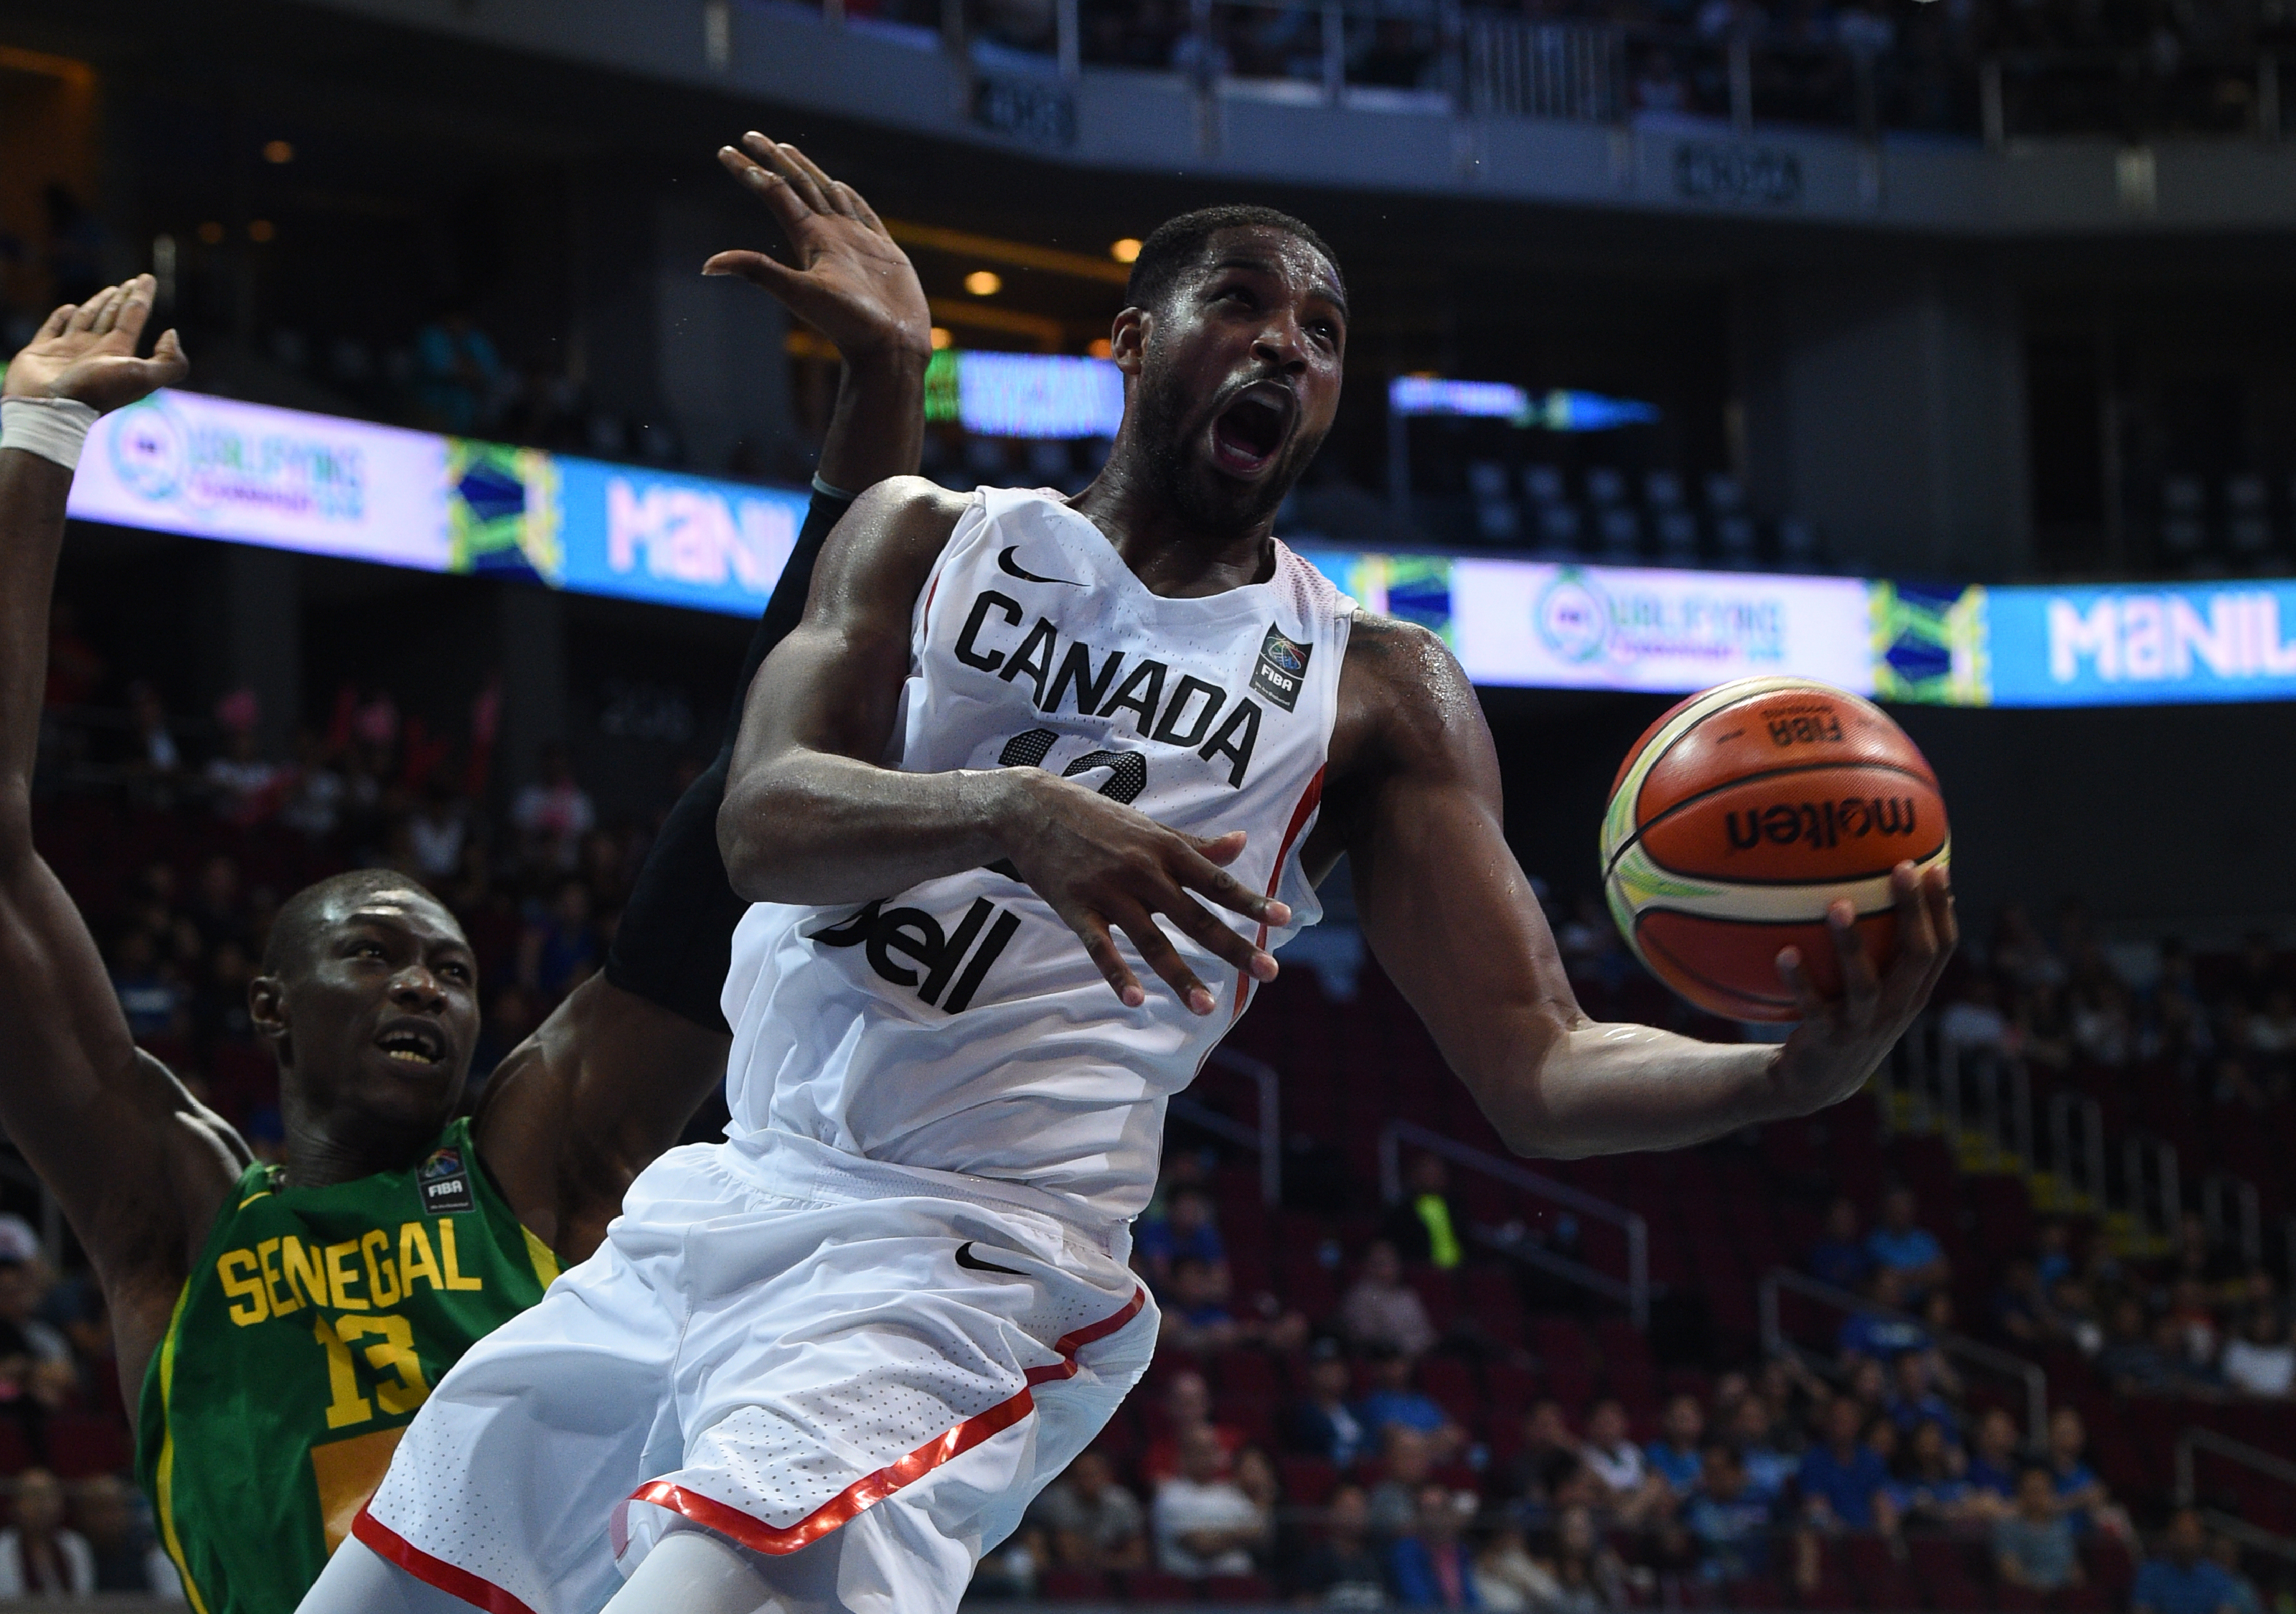 Tristan Thompson of Canada (R) goes up for a shot as Hamady Indiaye of Senegal defends during their 2016 FIBA Olympic men's qualifying basketball tournament in Manila on July 6, 2016. / AFP PHOTO / TED ALJIBE